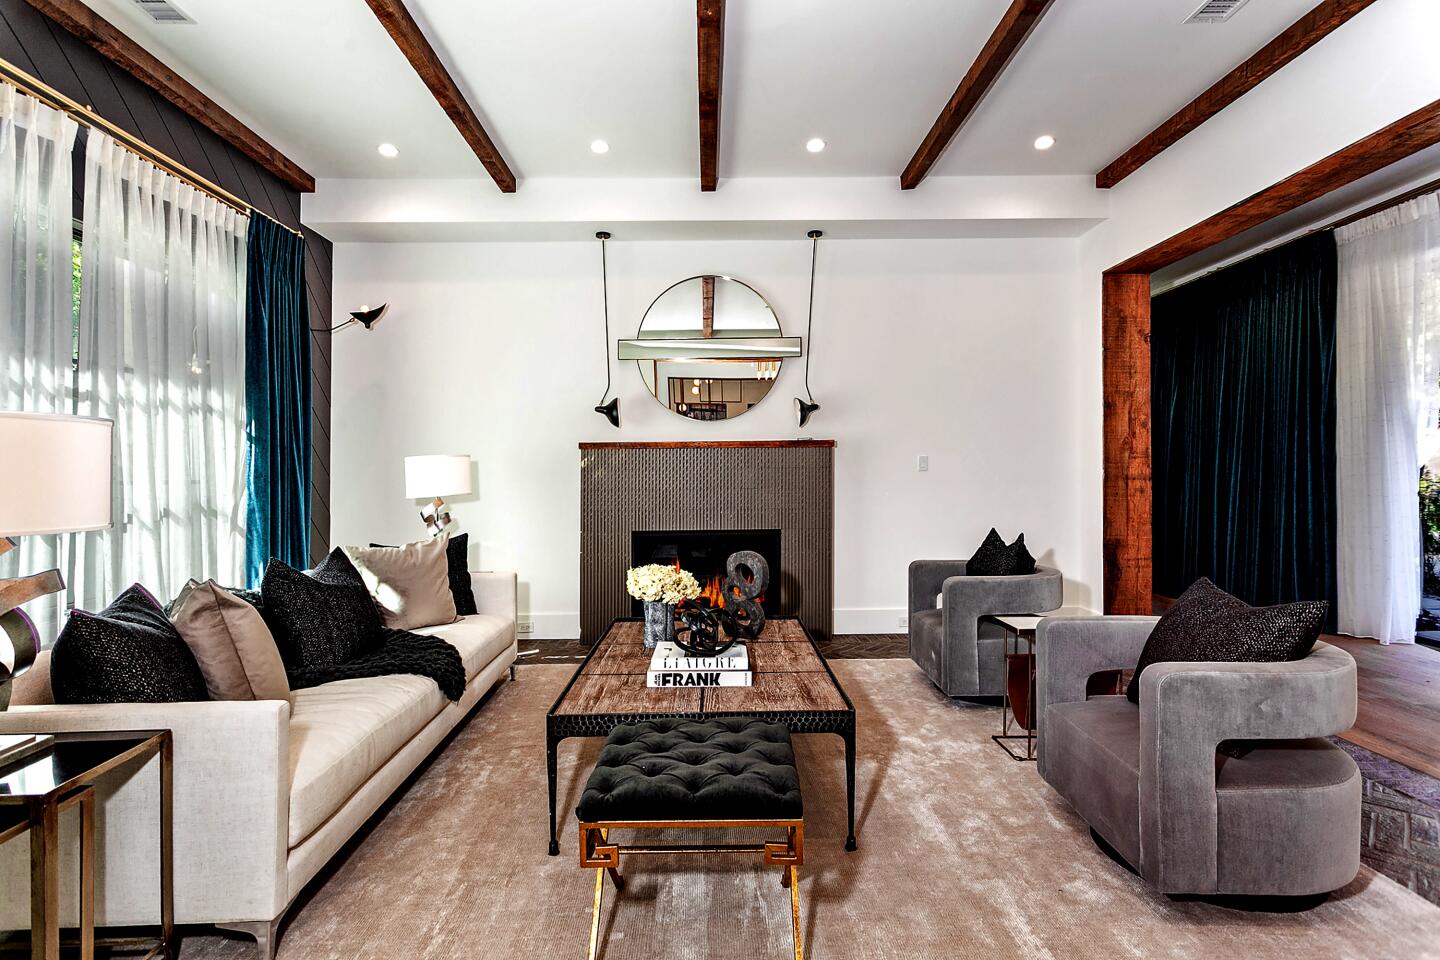 Rustic wood brings a farmhouse feel to Kelly Clarkson's home; the living spaces have clean lines and walls of glass.